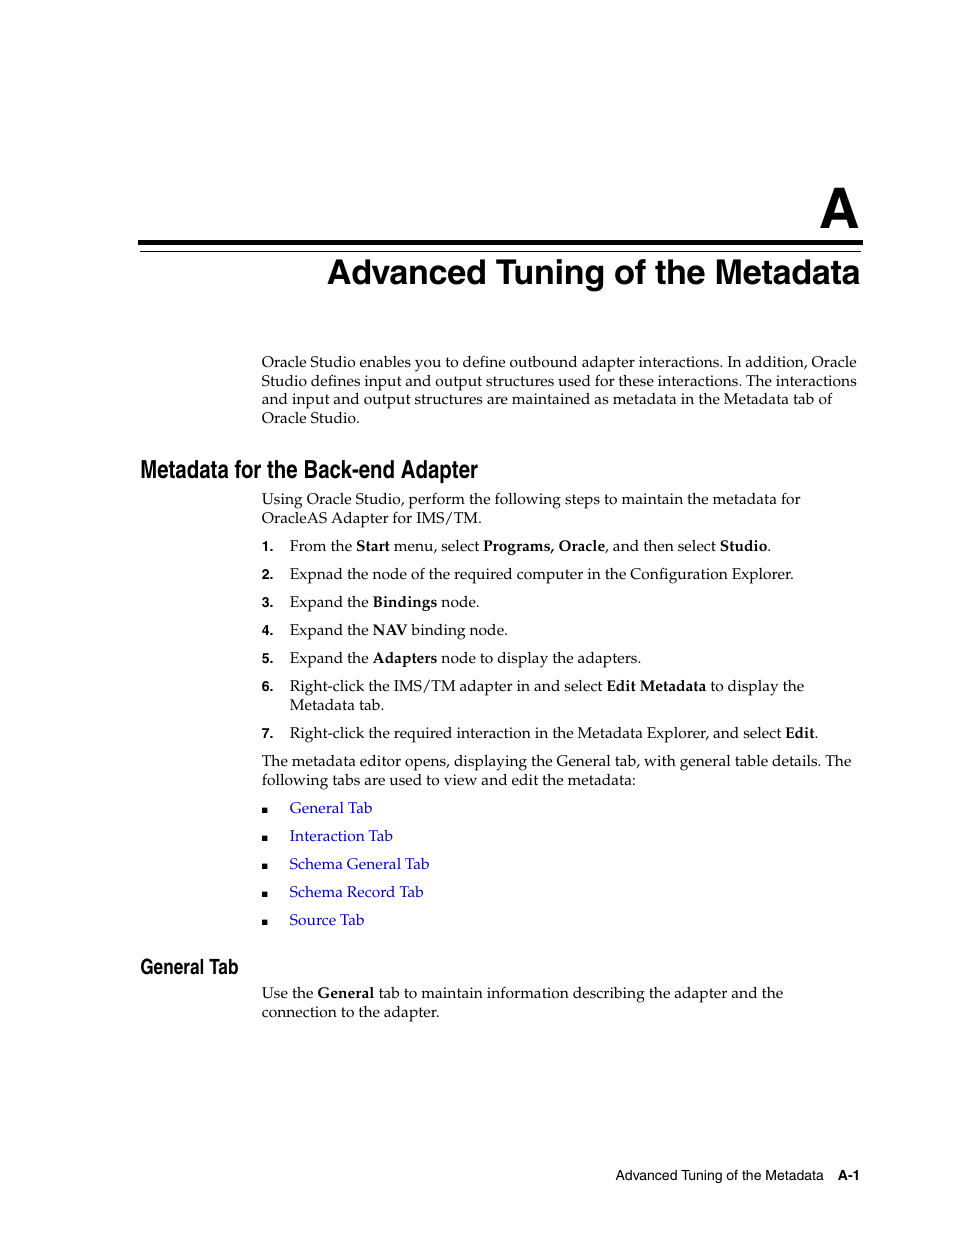 A advanced tuning of the metadata, Metadata for the back-end adapter, General tab | Advanced tuning of the metadata | Oracle Audio Technologies B31003-01 User Manual | Page 77 / 112